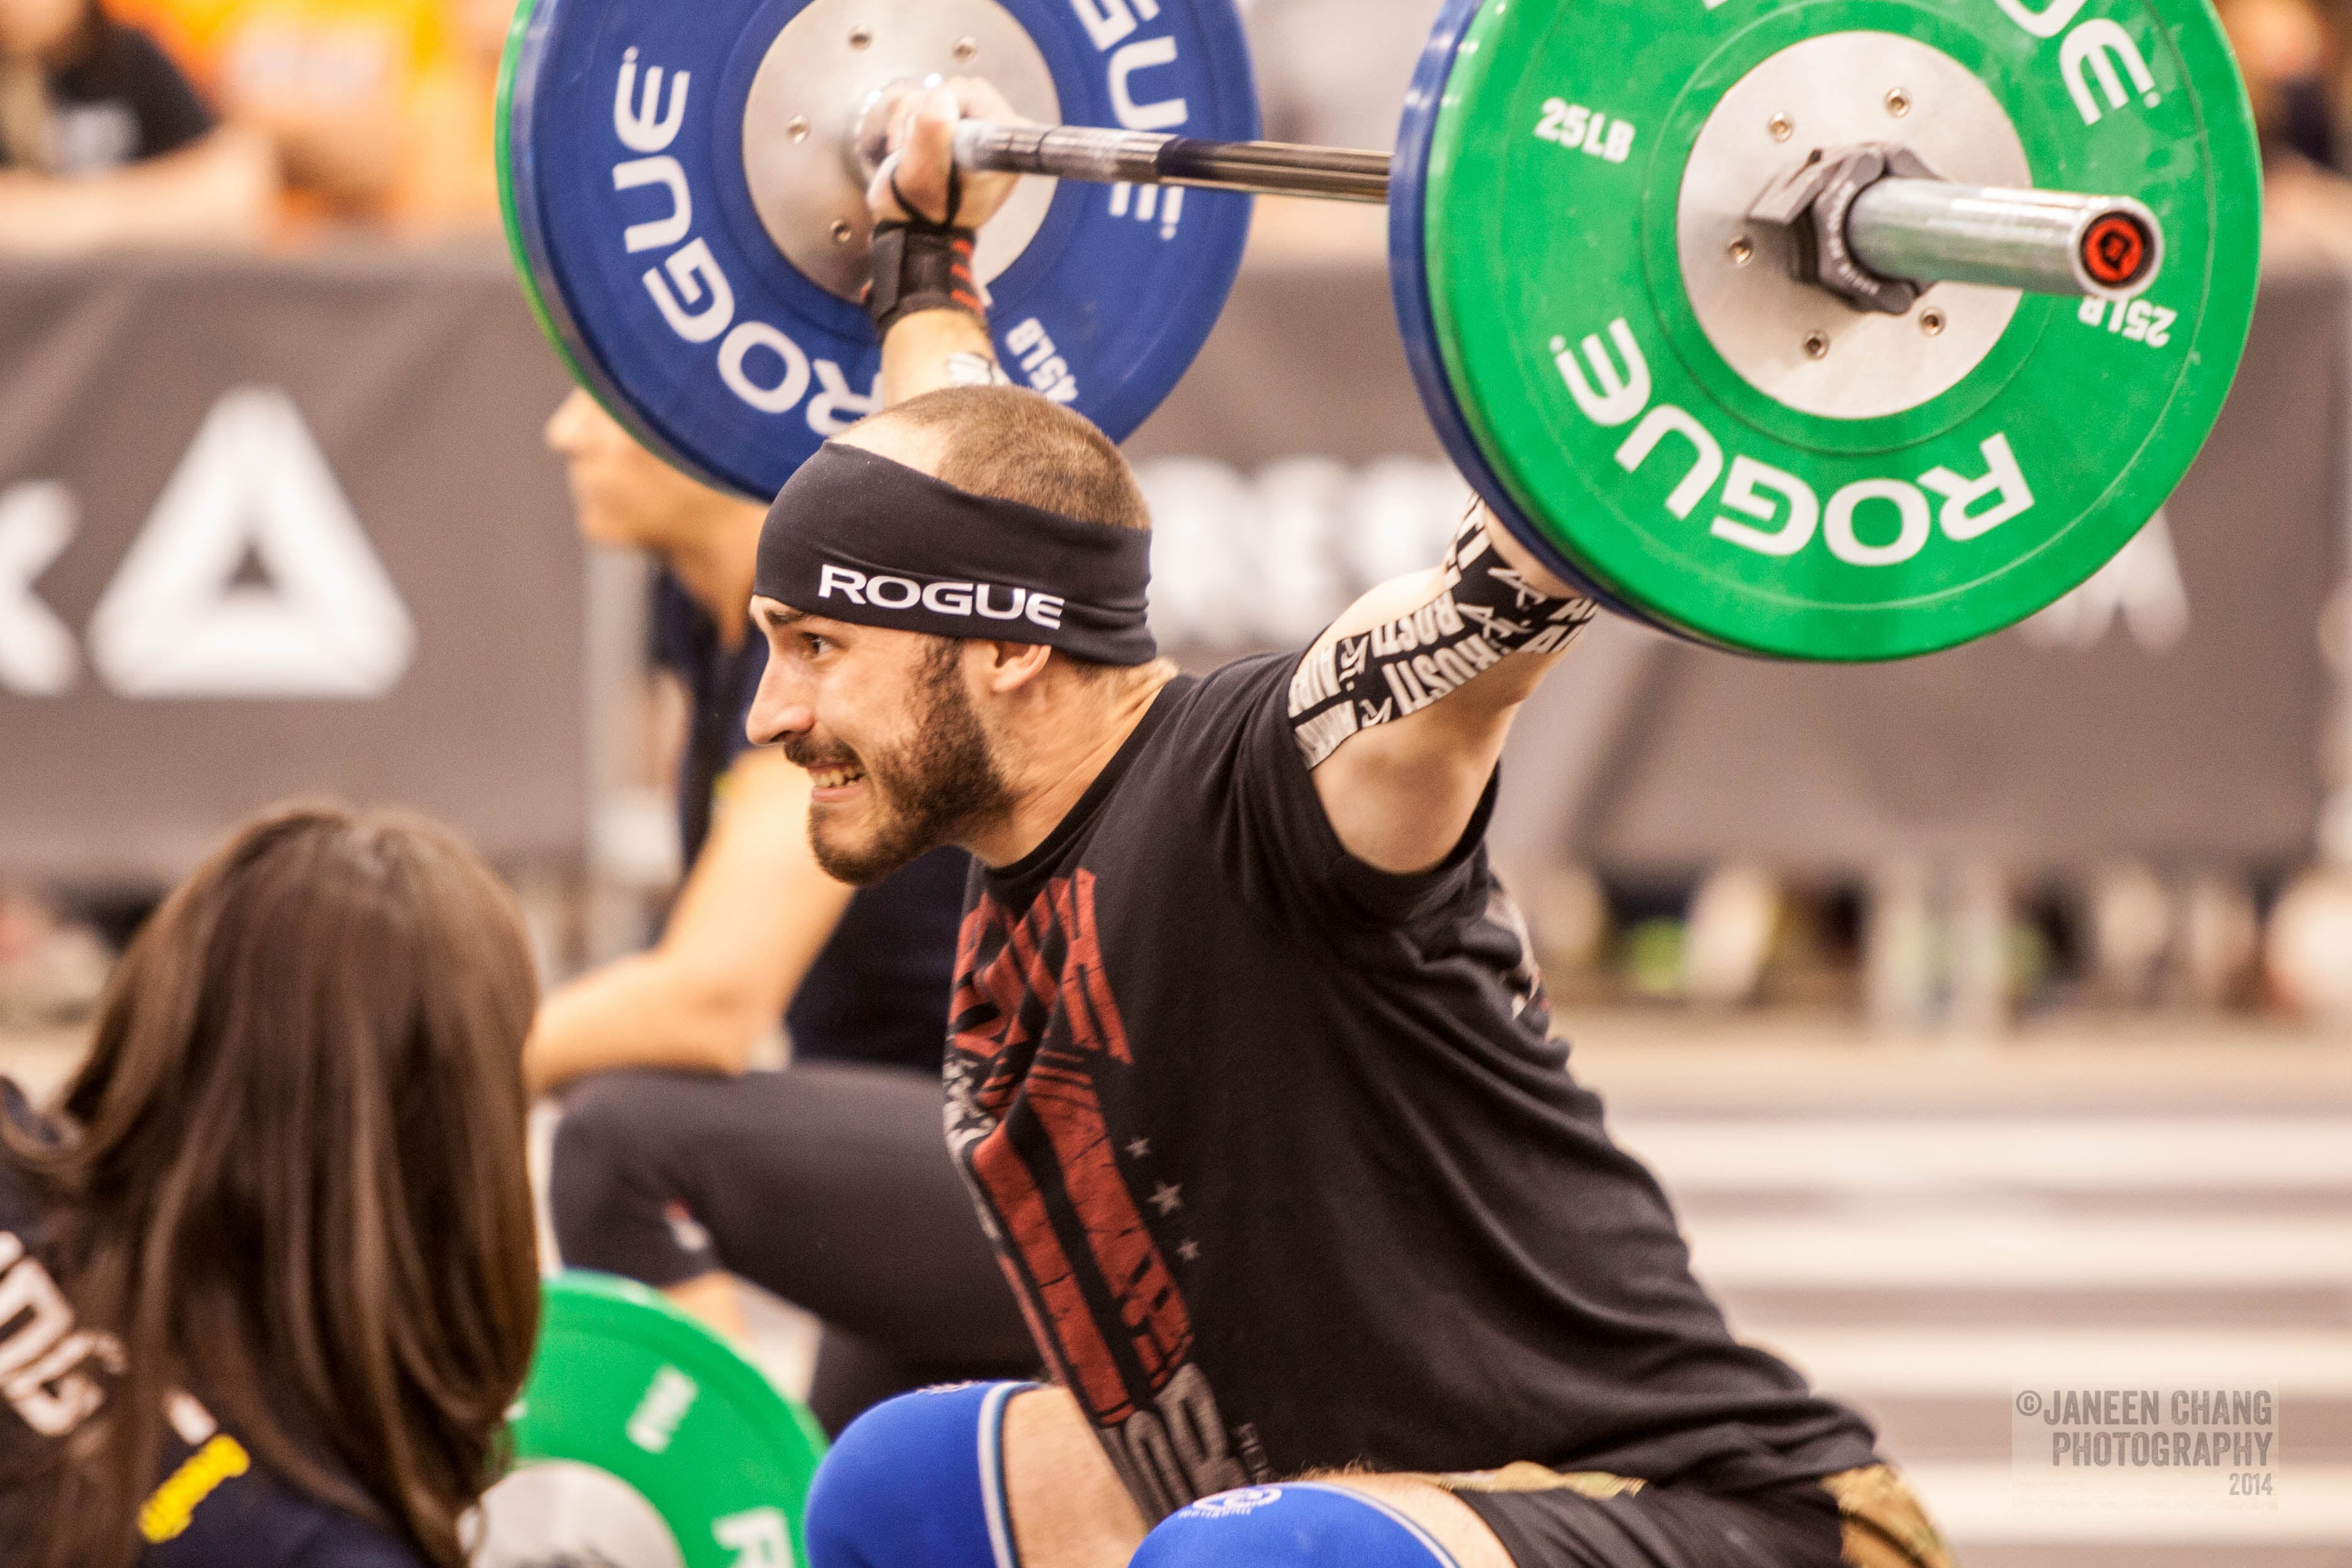 How Important Is Strength to the CrossFit Athlete?